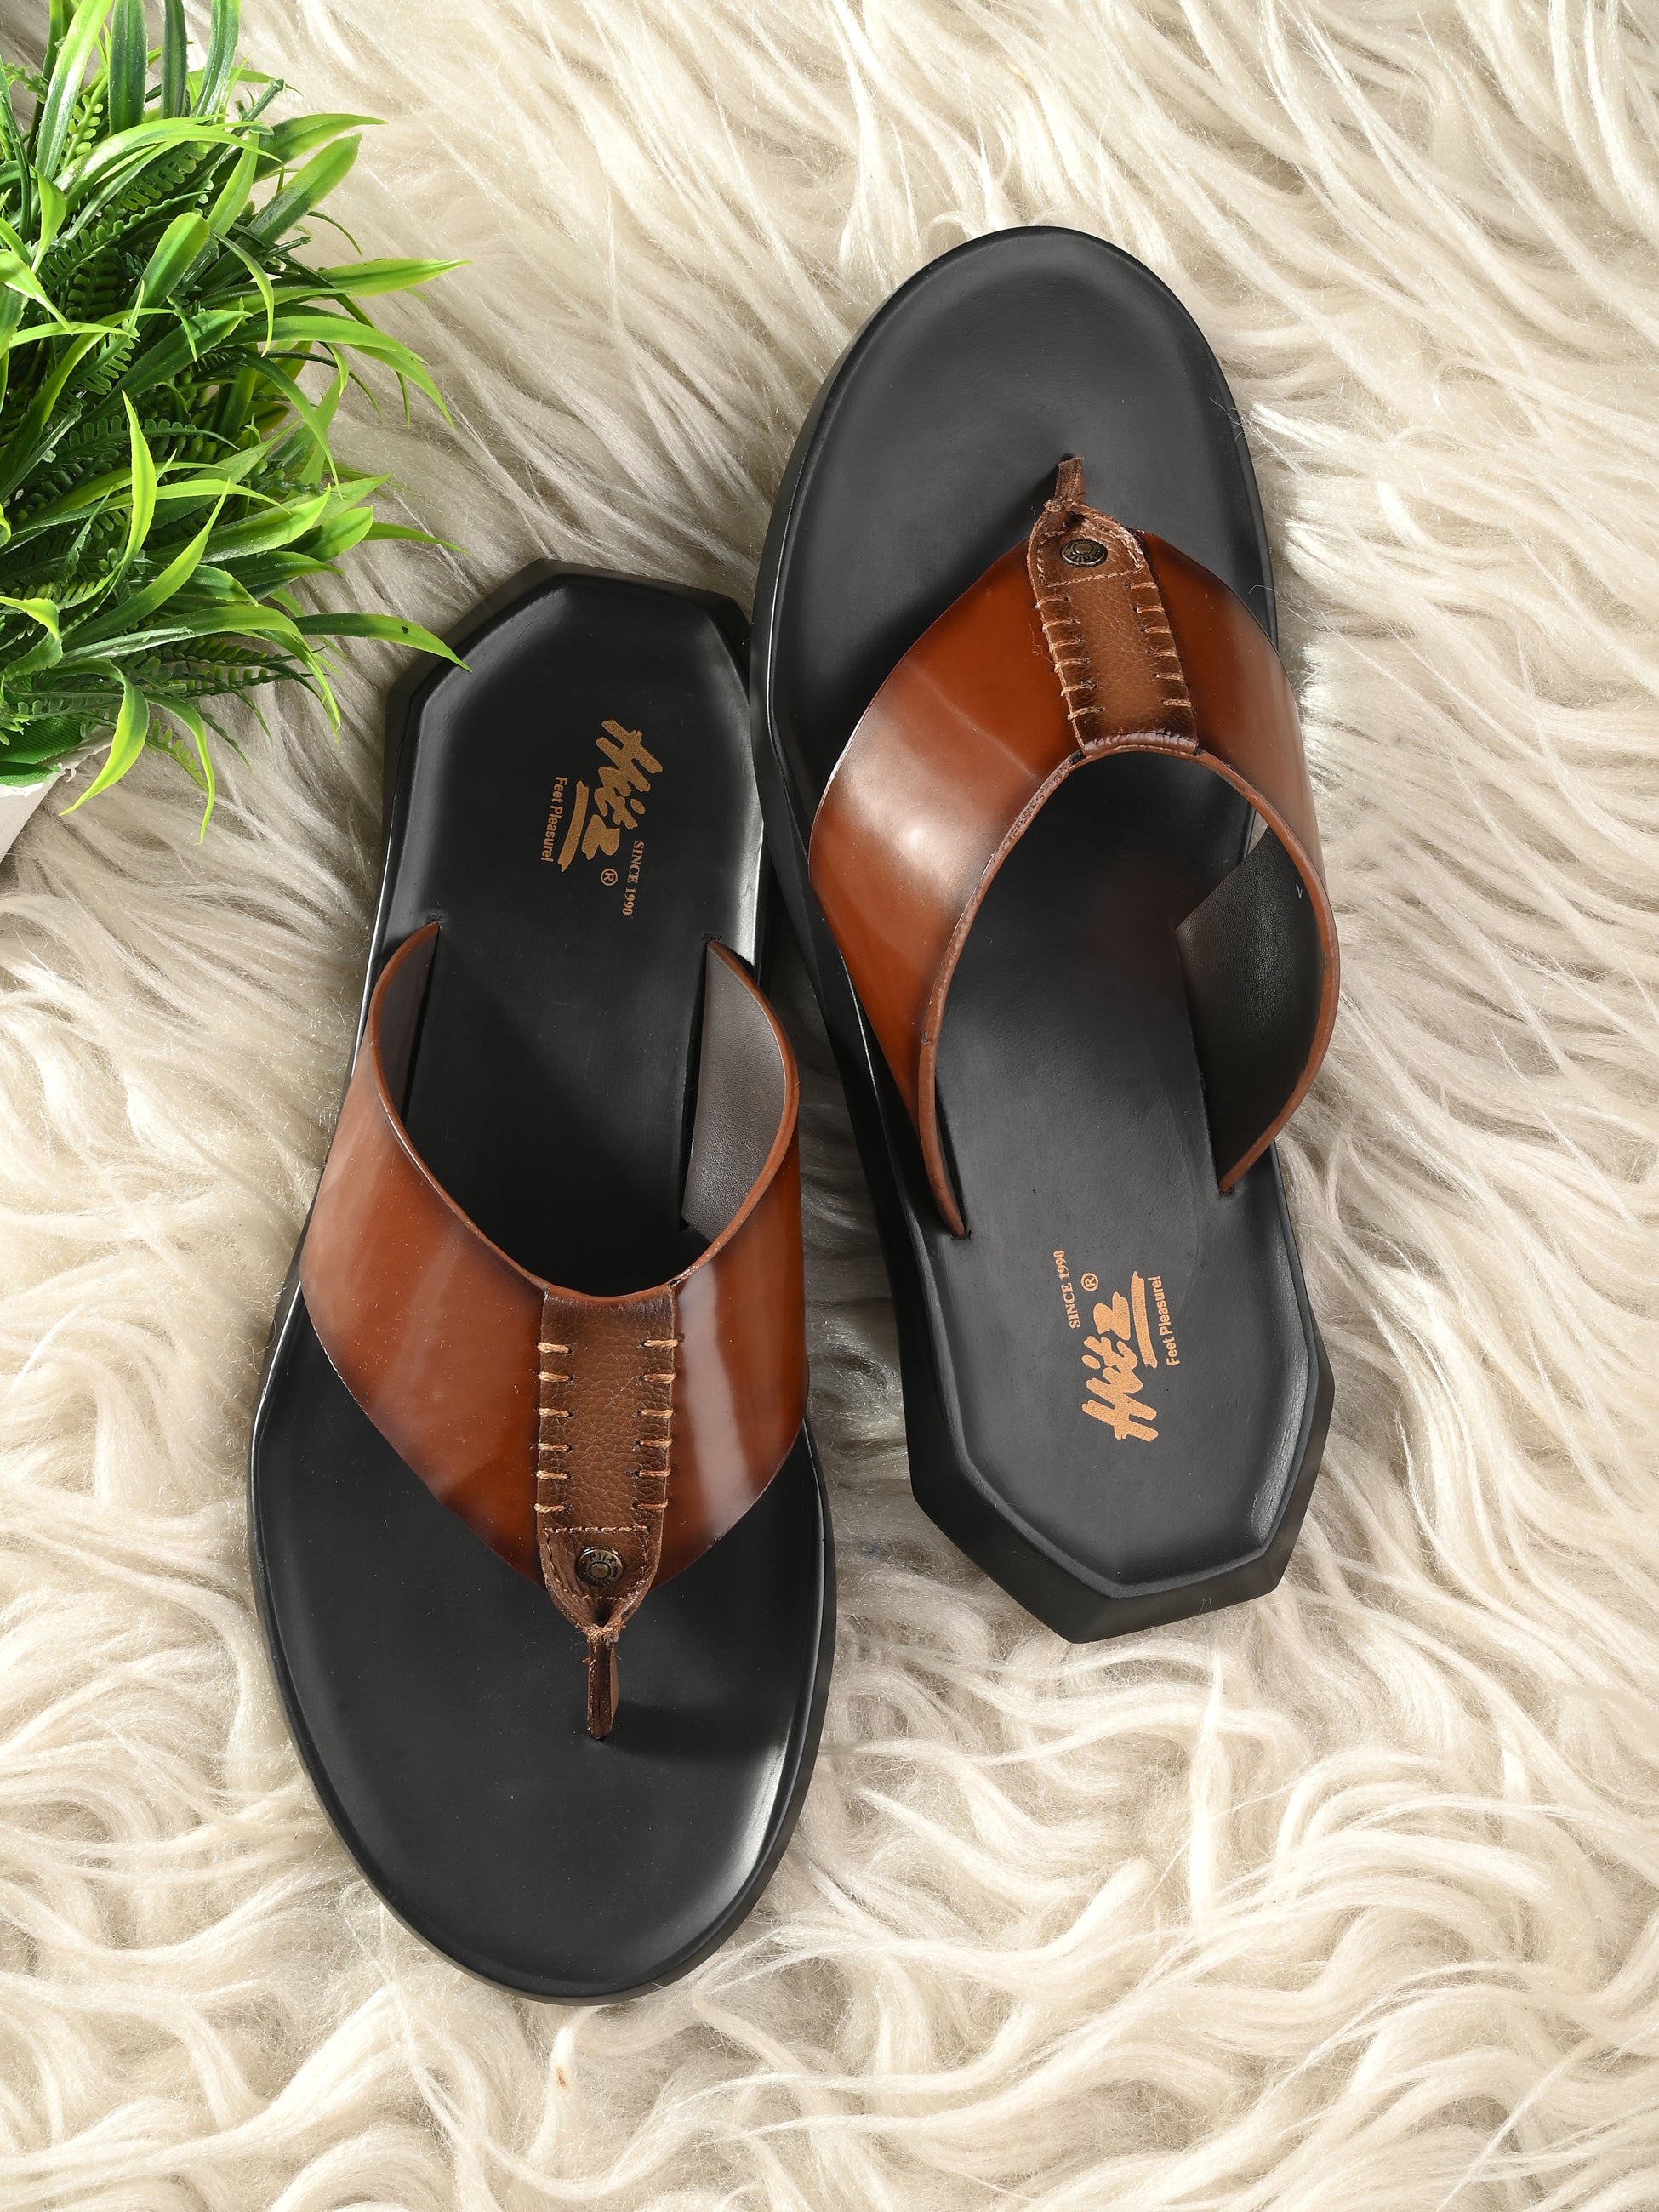 Slippers for Men: 5 Best Slippers for Men in India Starting at Rs. 280 -  The Economic Times